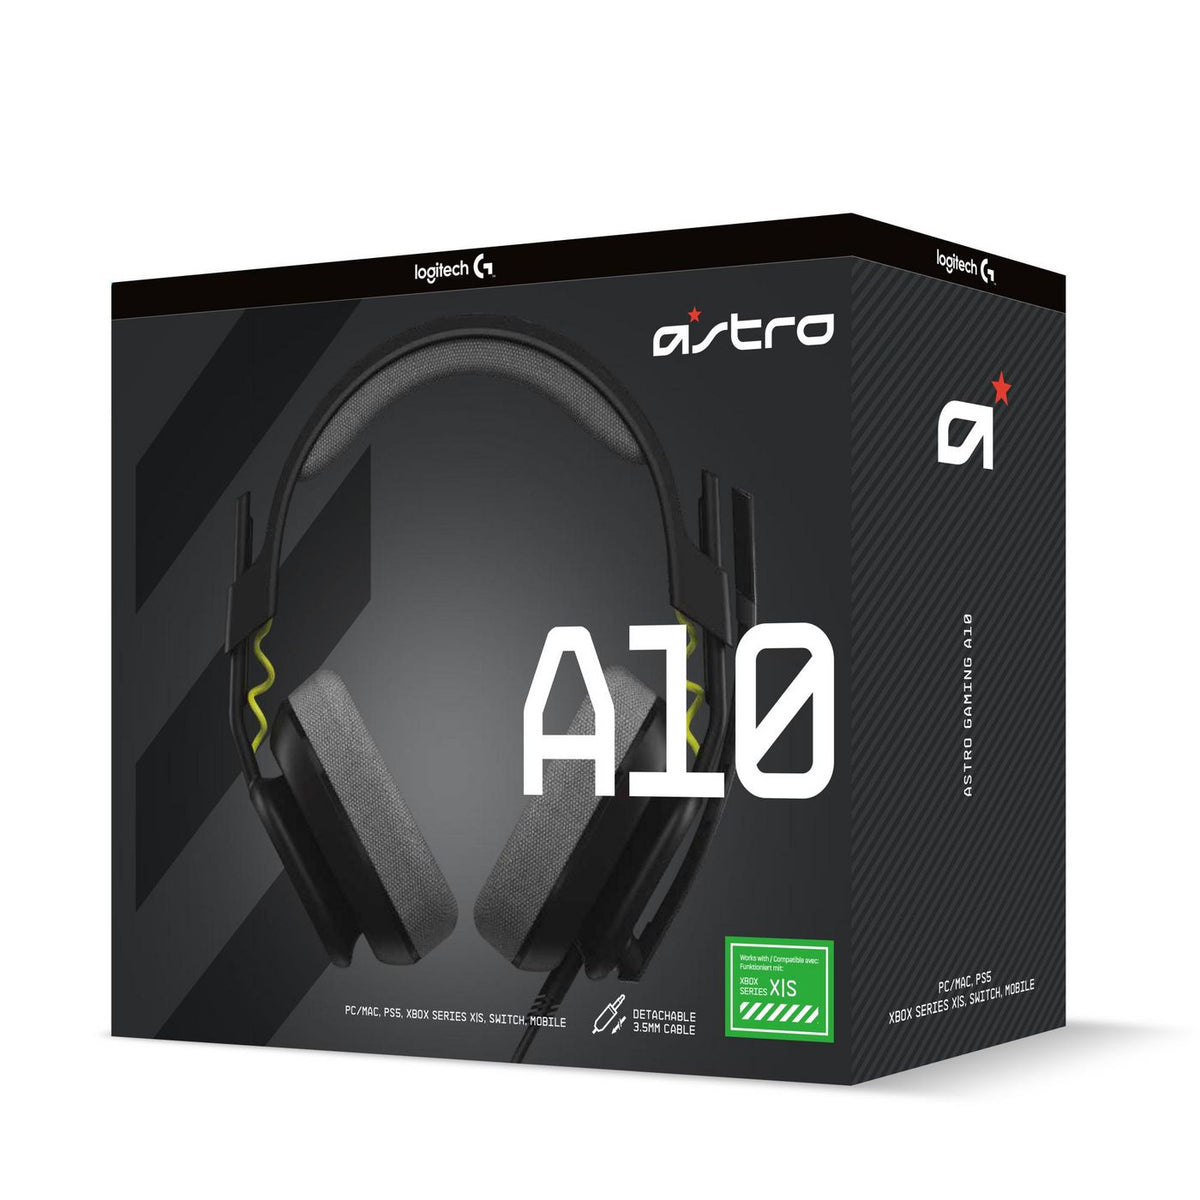 ASTRO A10 WIRED HEADSET ACCS